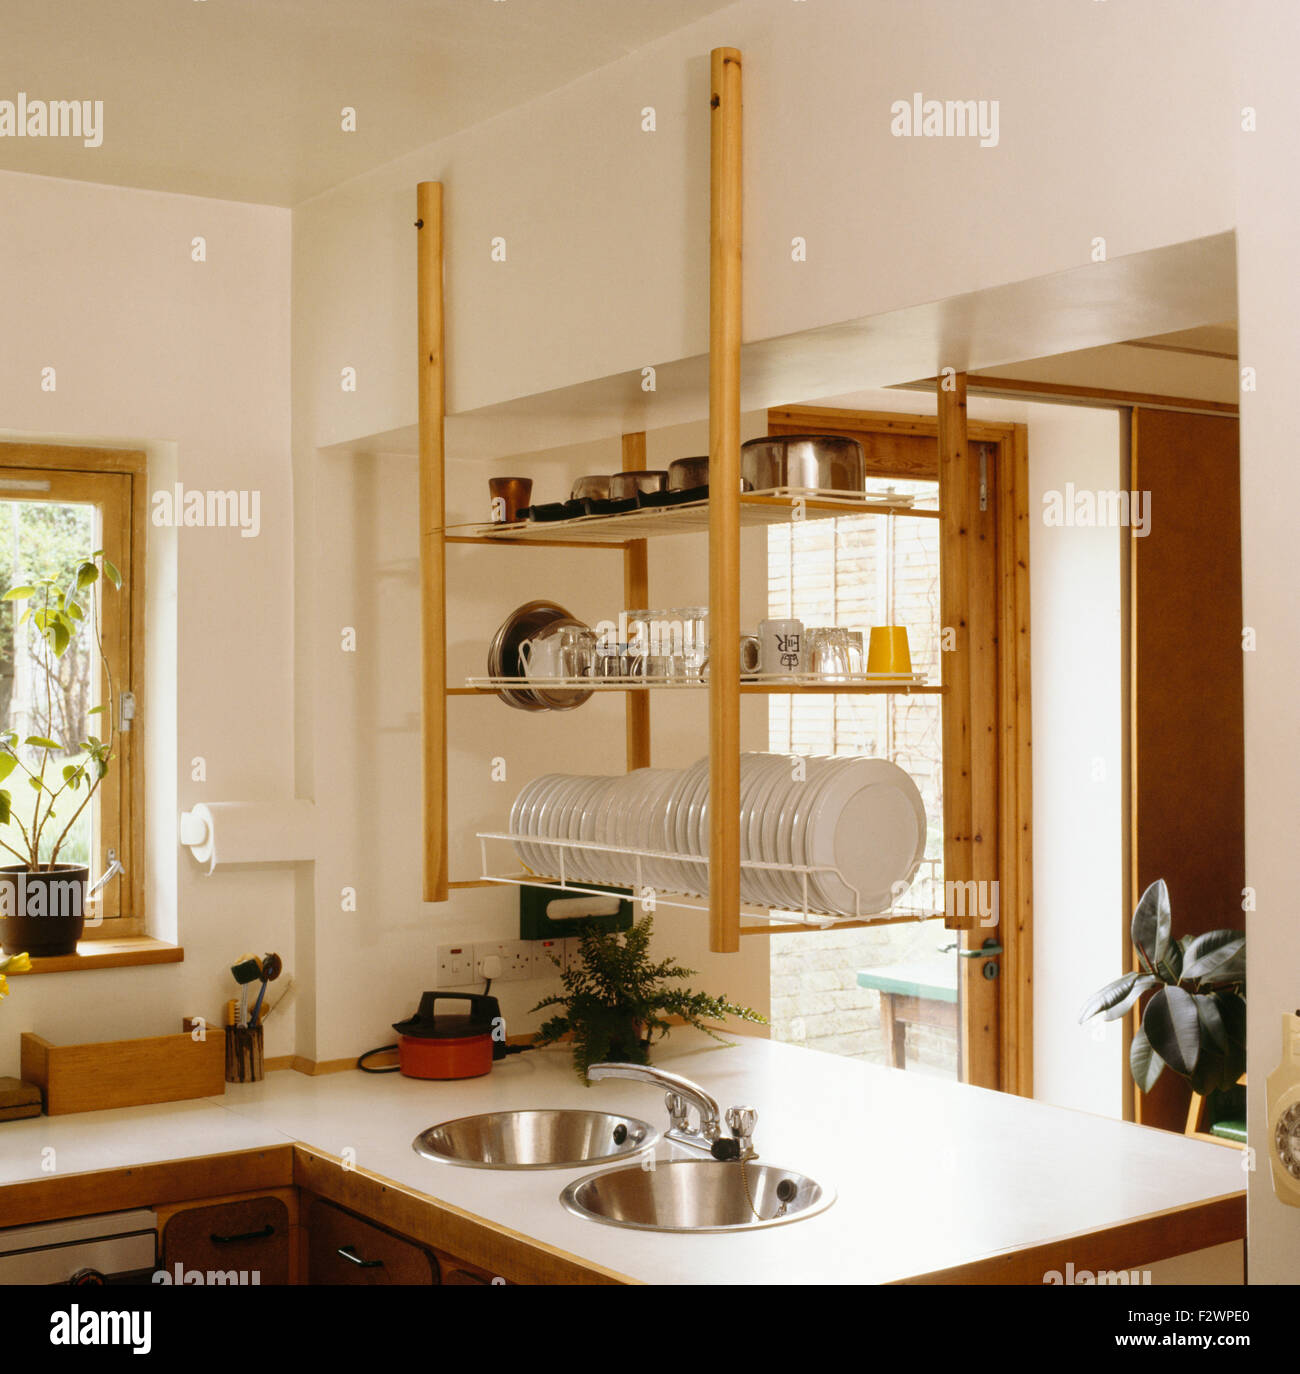 https://c8.alamy.com/comp/F2WPE0/open-hanging-shelves-above-fitted-unit-with-stainless-steel-sinks-F2WPE0.jpg